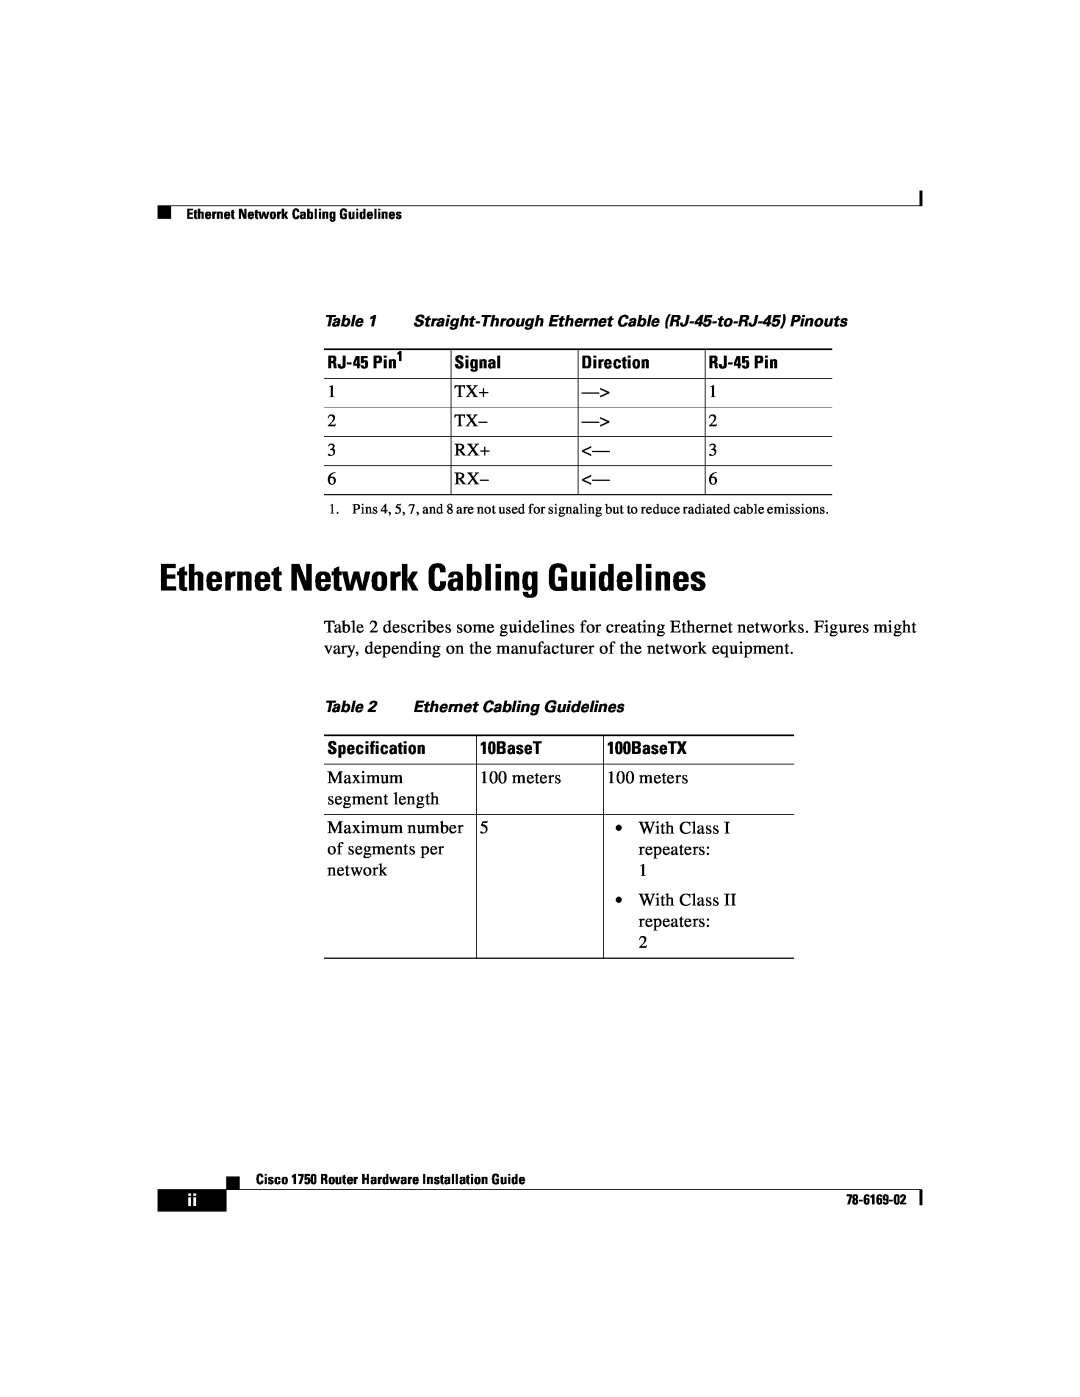 Cisco Systems CISCO1750 manual Ethernet Network Cabling Guidelines, Straight-Through Ethernet Cable RJ-45-to-RJ-45 Pinouts 